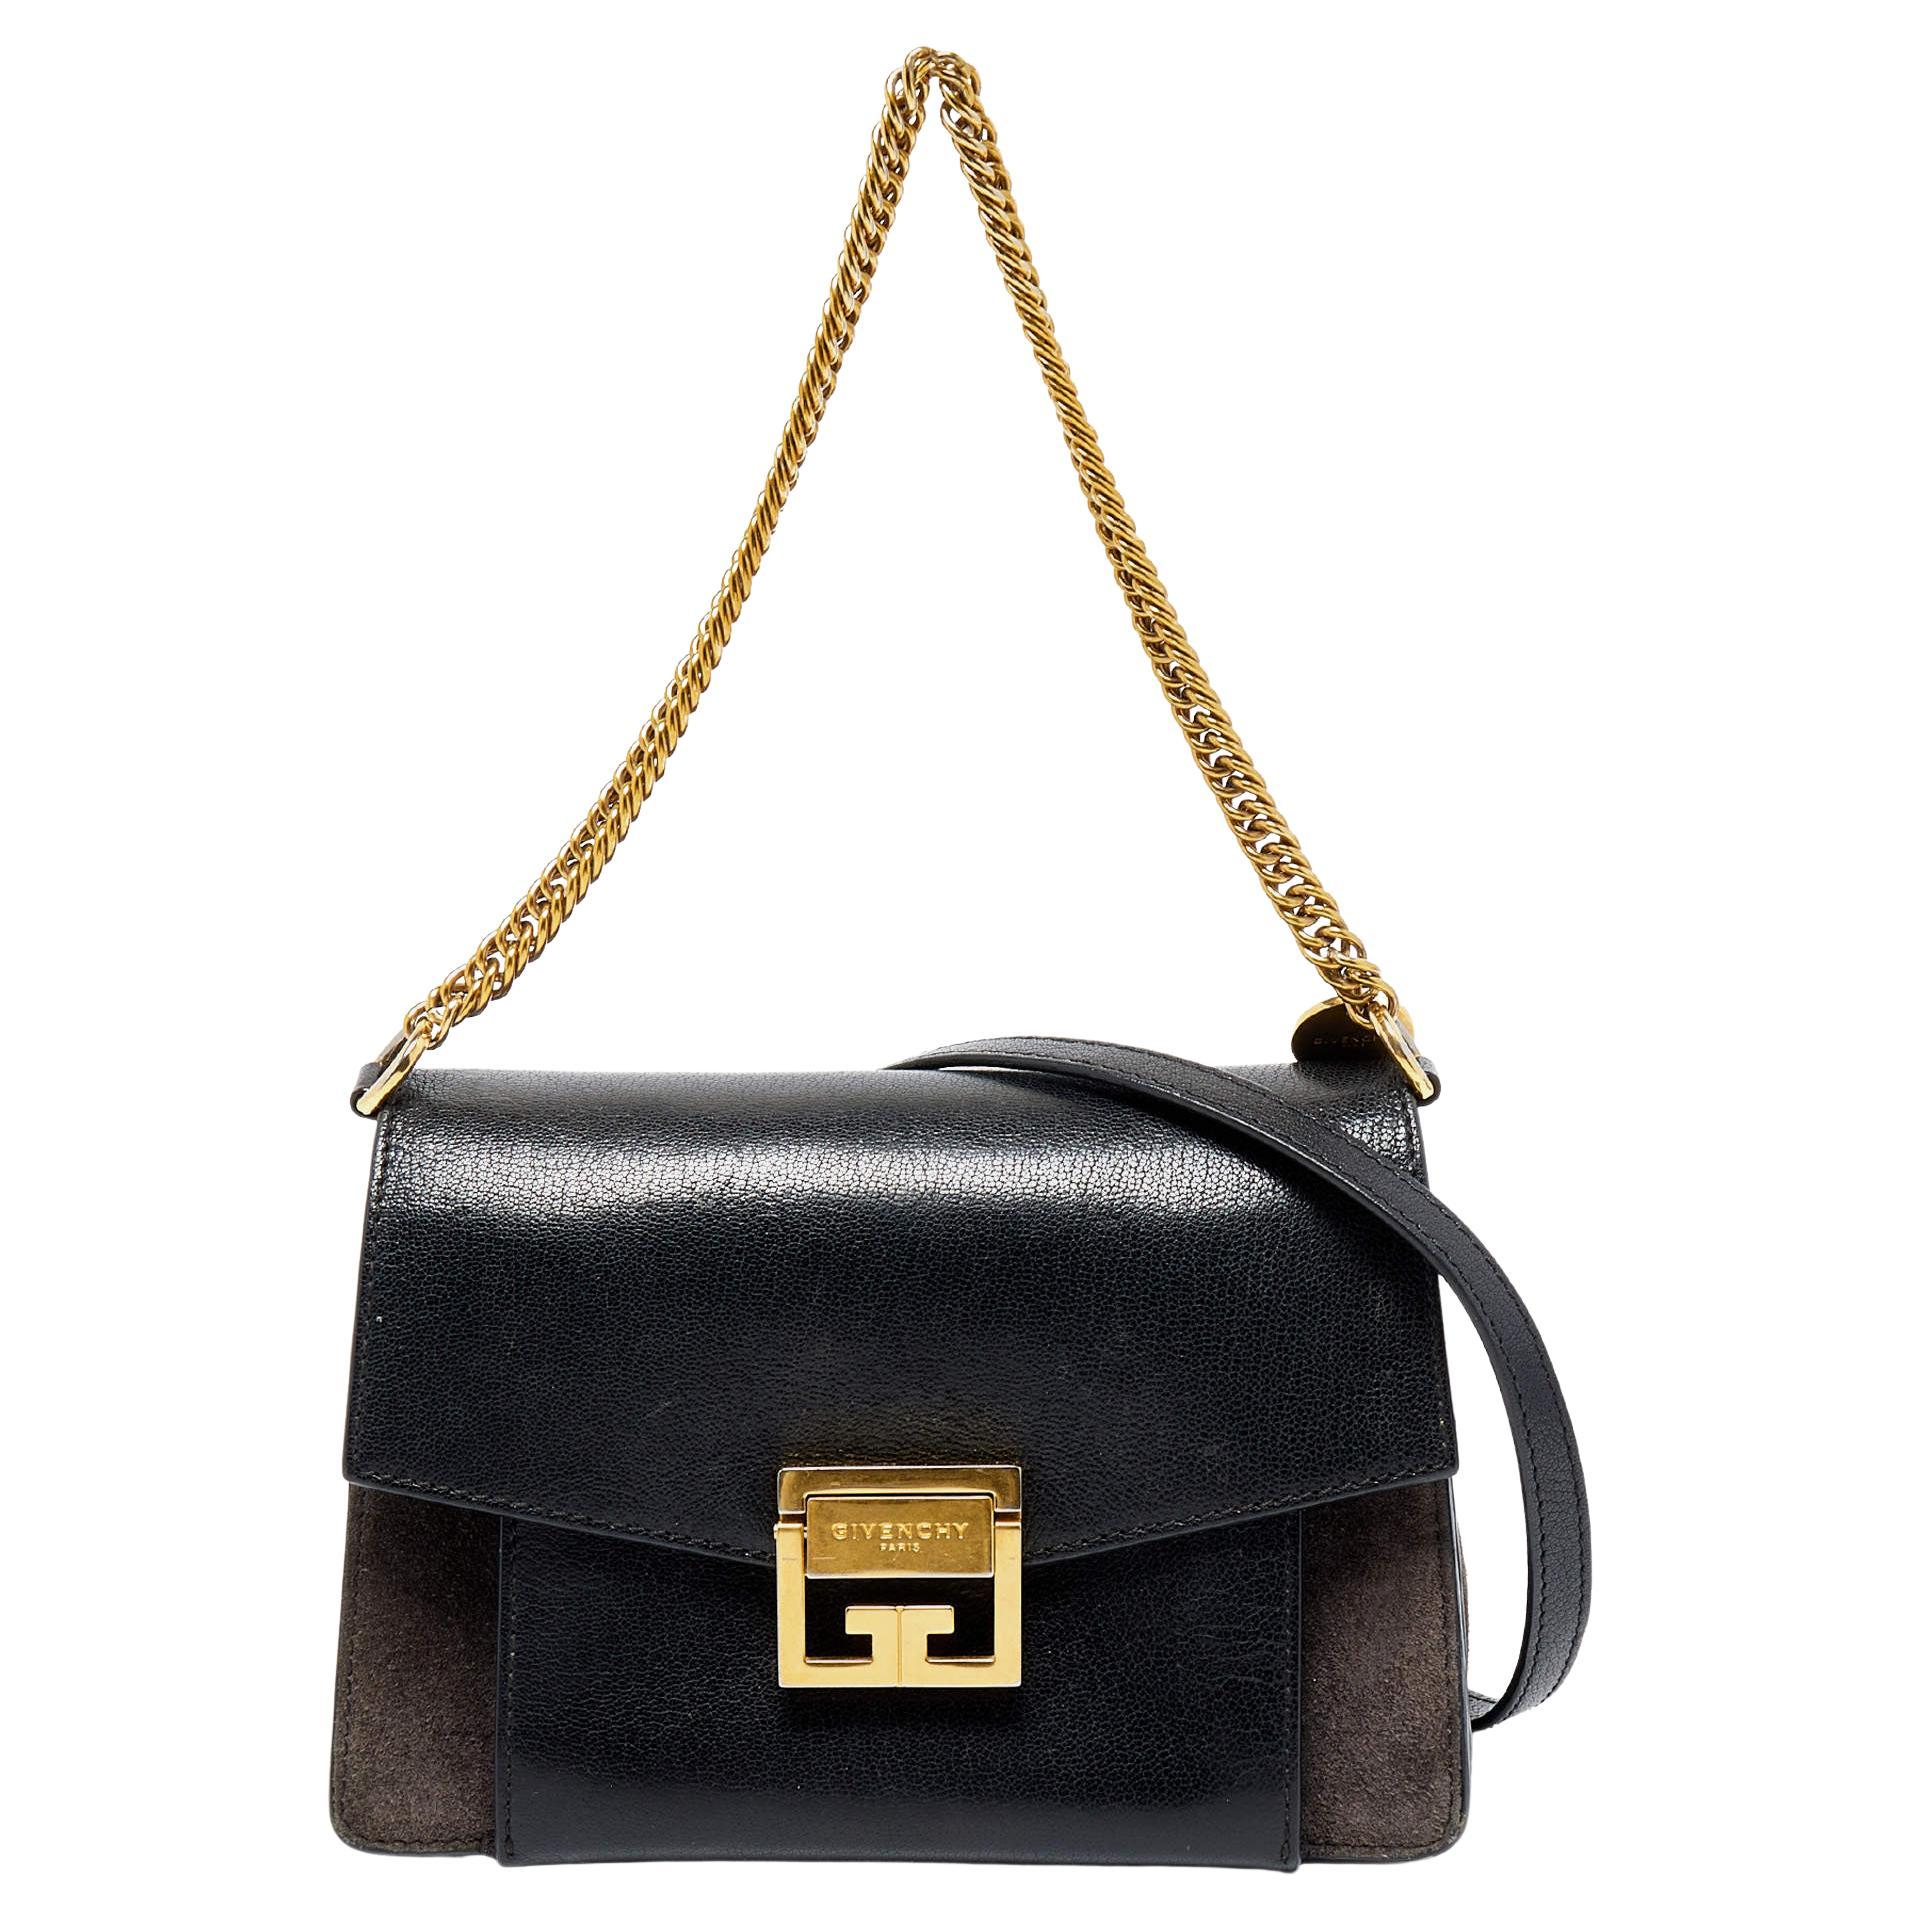 Givenchy Black Leather and Suede Small GV3 Shoulder Bag